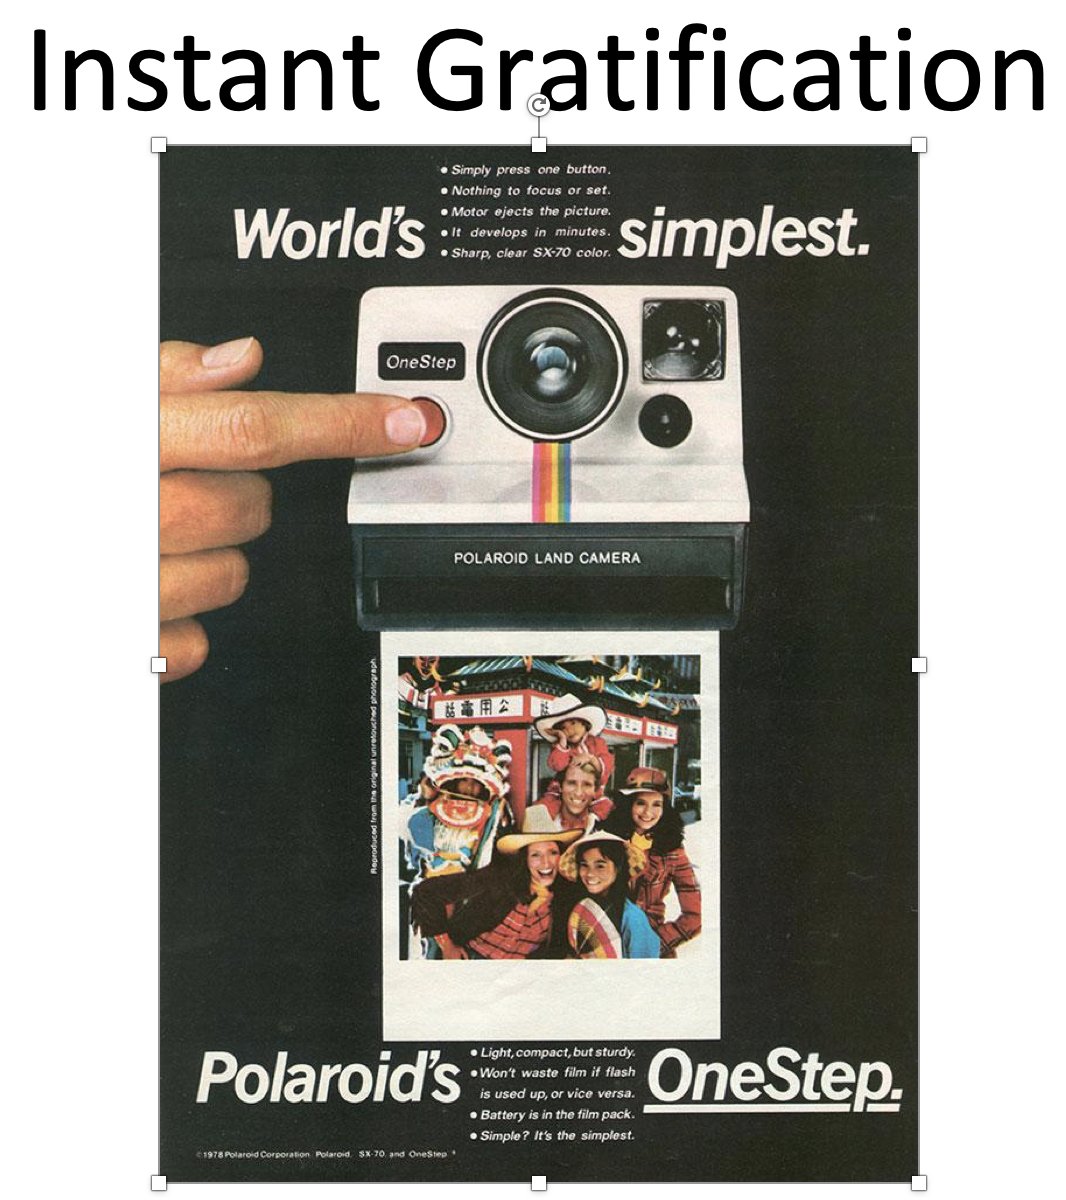 (6/n) Digital cameras would go on to fulfill a strong human craving for instant gratification. But make no mistake, this craving has its roots in the long past. Interestingly, the original Polaroid built for this very purpose became widely used around the same time.